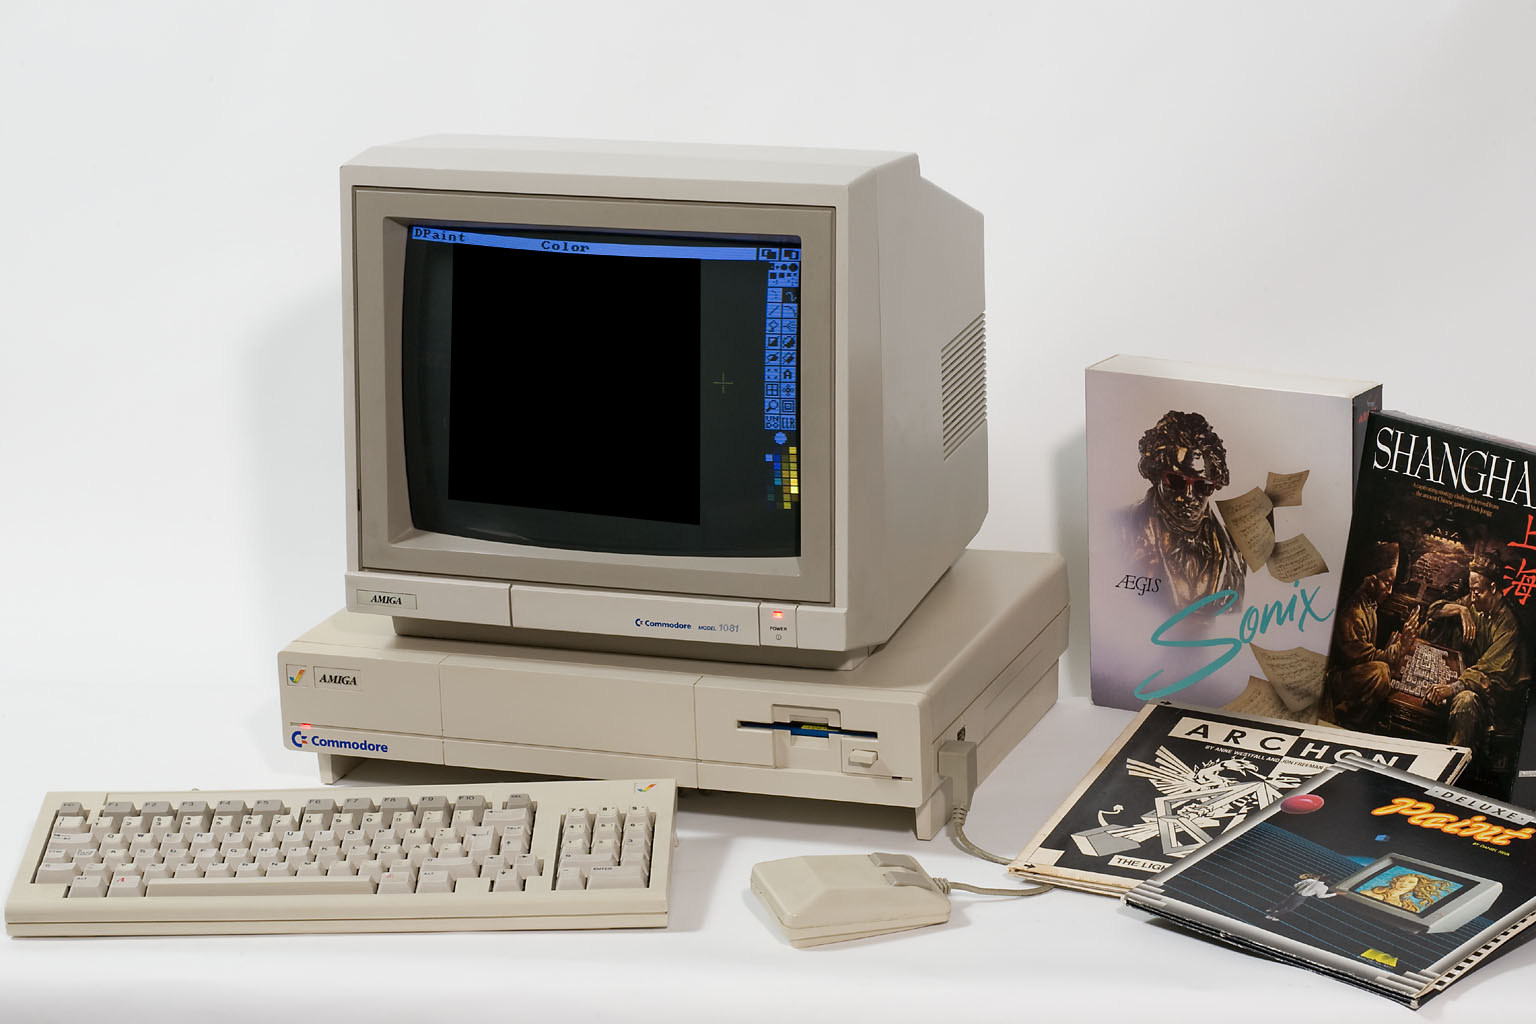 An incredible machine, the Amiga 1000, but it was too expensive for a 16 year old to afford.